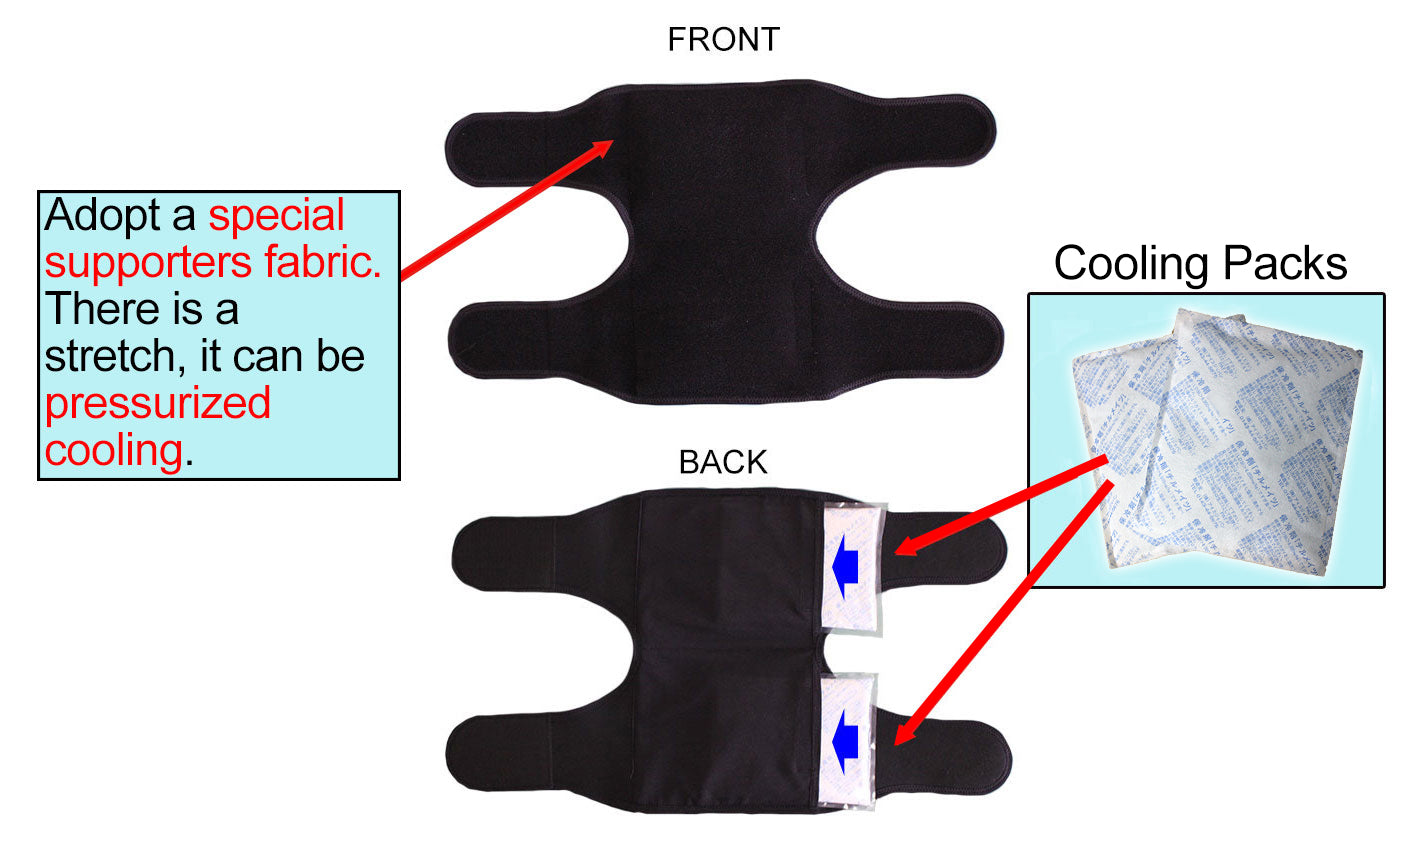 Detailed image showing beneficial features of 3 in 1 brace and where the ice packs are inserted.